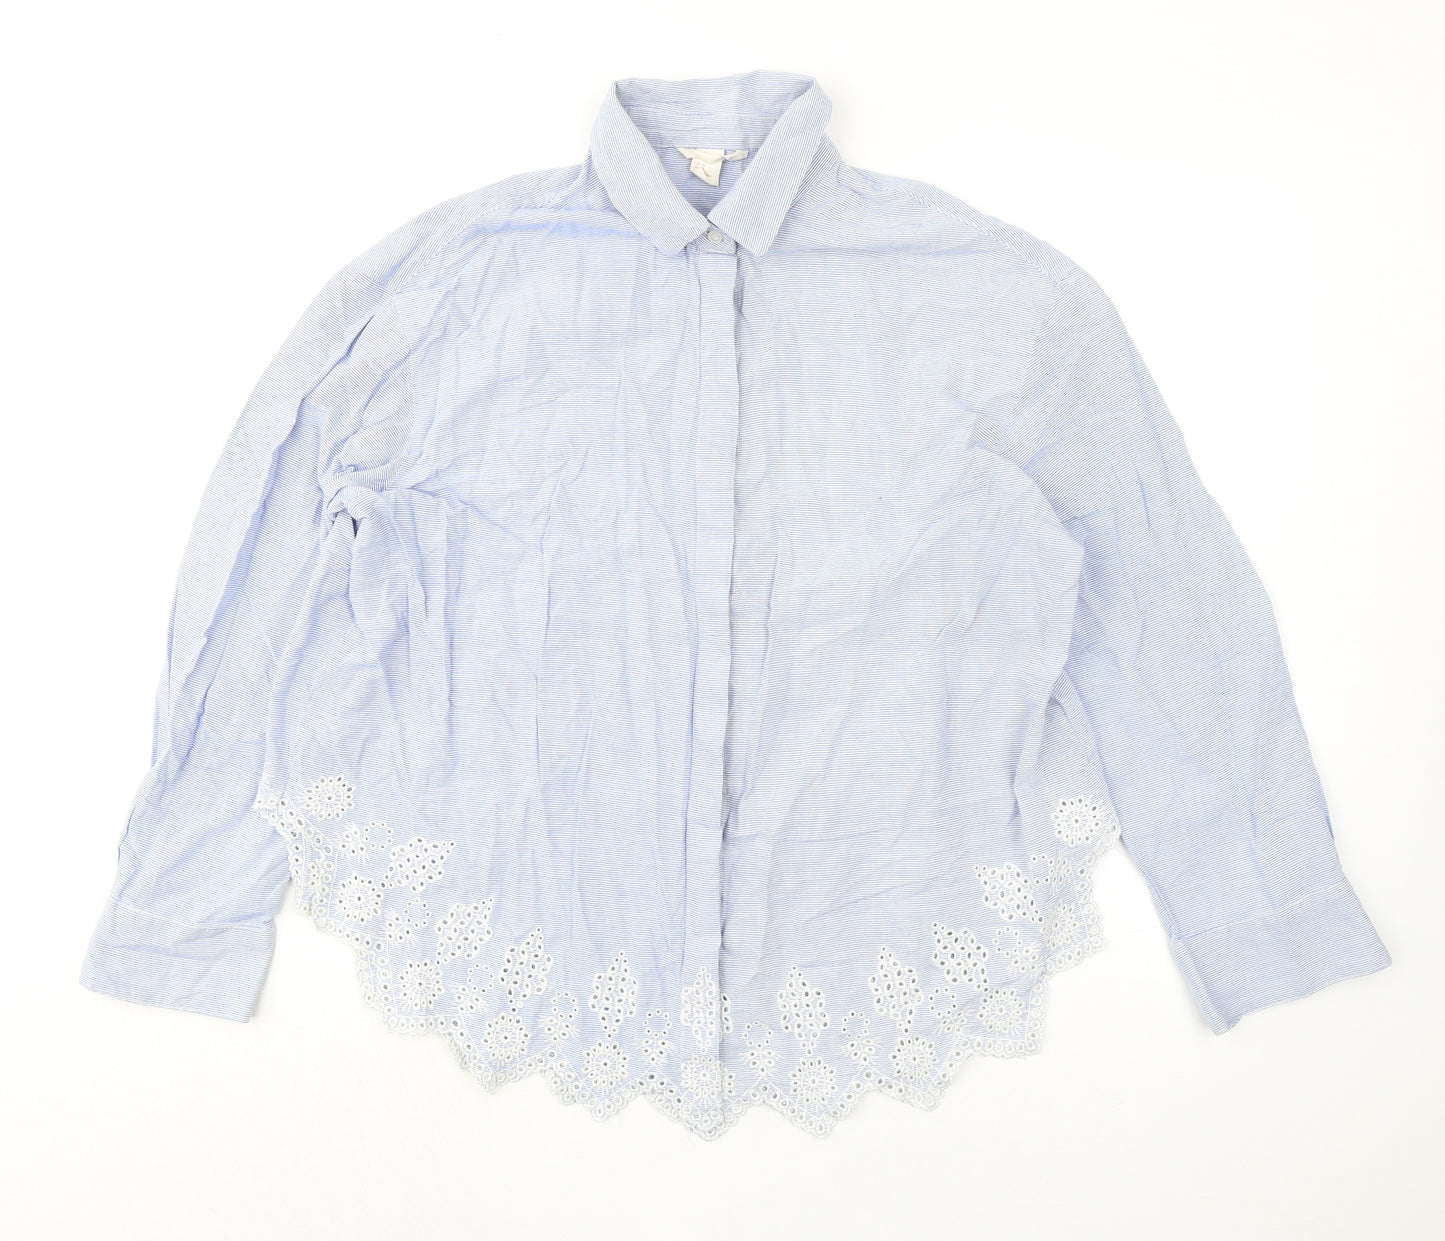 H&M Womens Blue Striped 100% Cotton Basic Button-Up Size 14 Collared - Broderie Anglaise Details